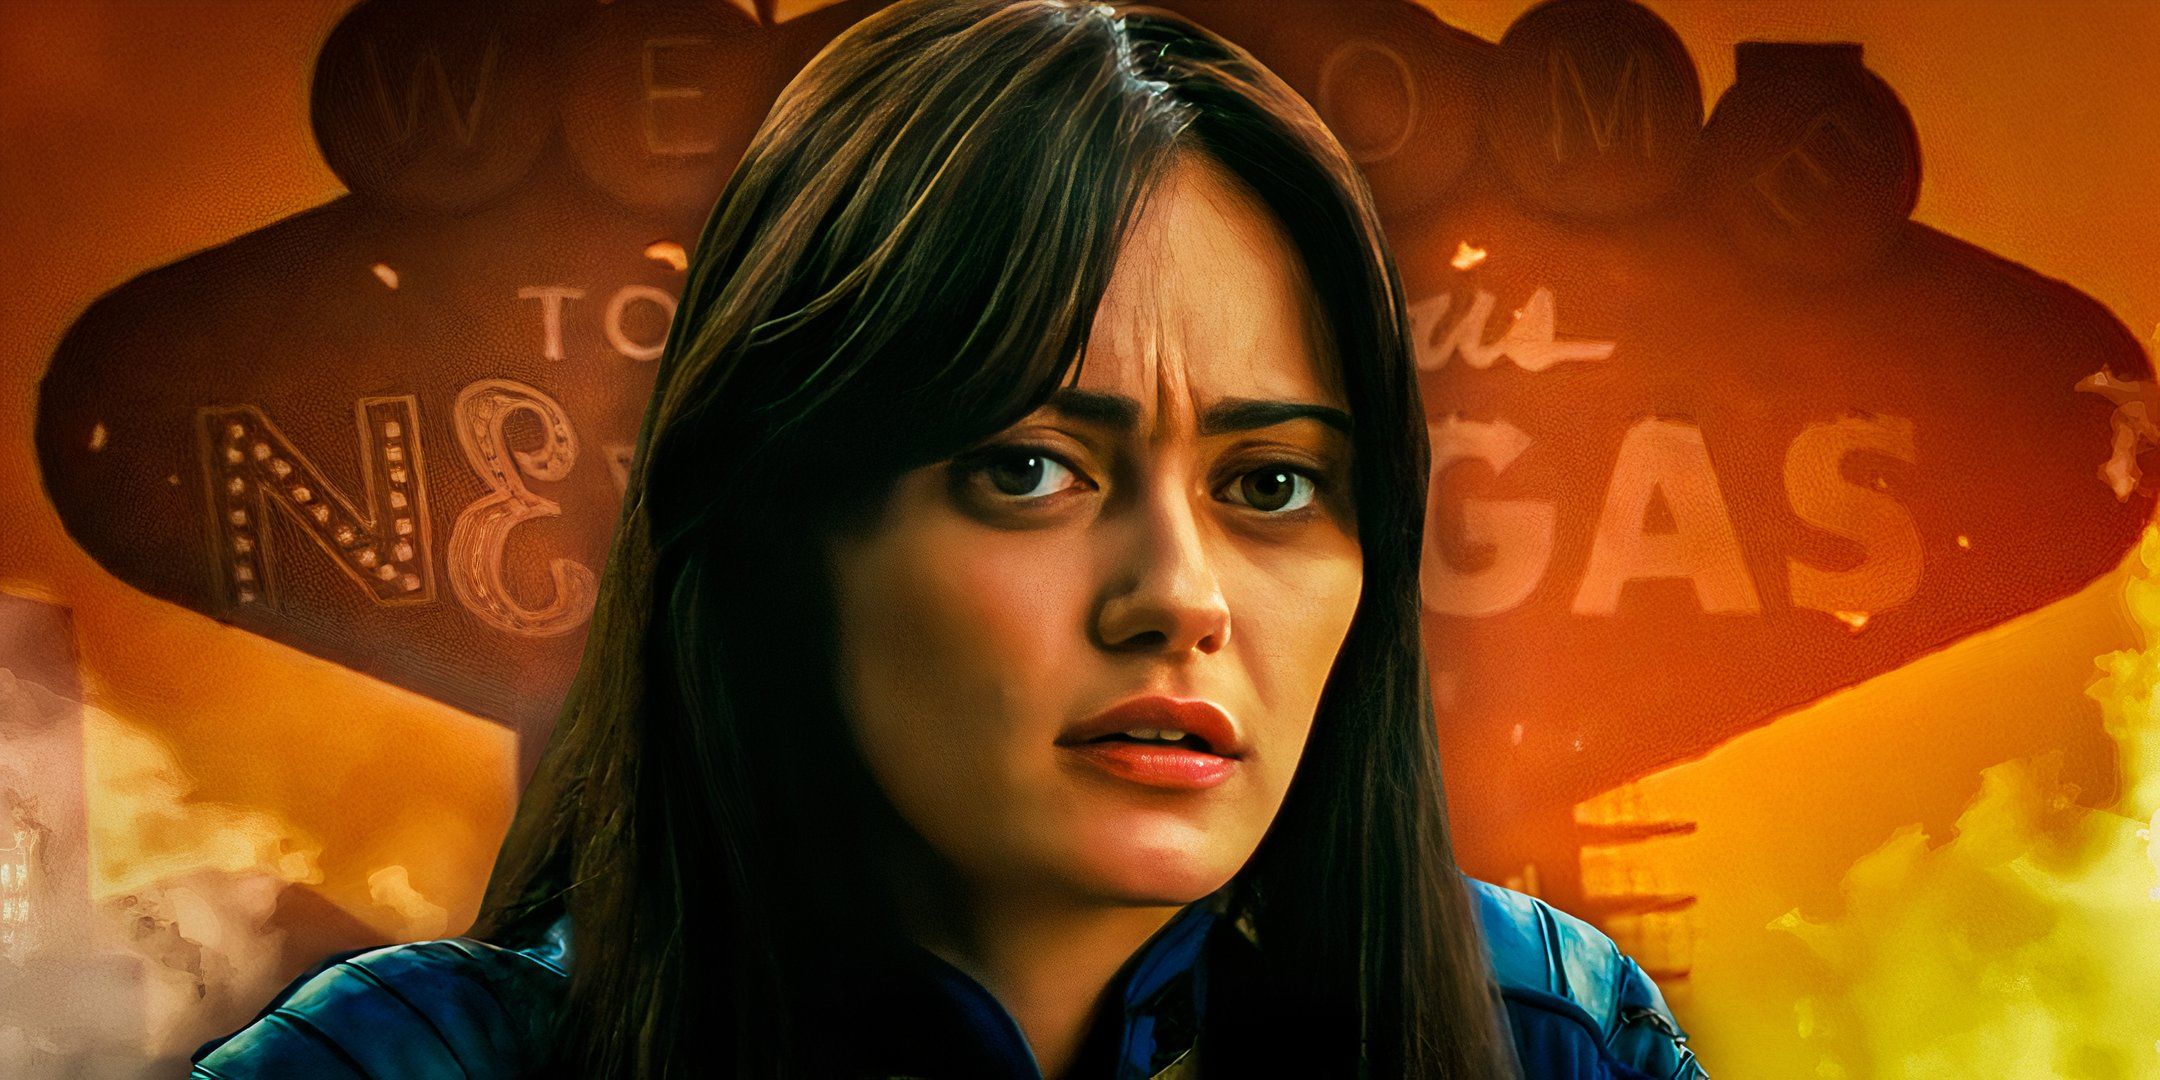 Lucy MacLean (Ella Purnell) looking worried in front of the sign for New Vegas in the Fallout TV show